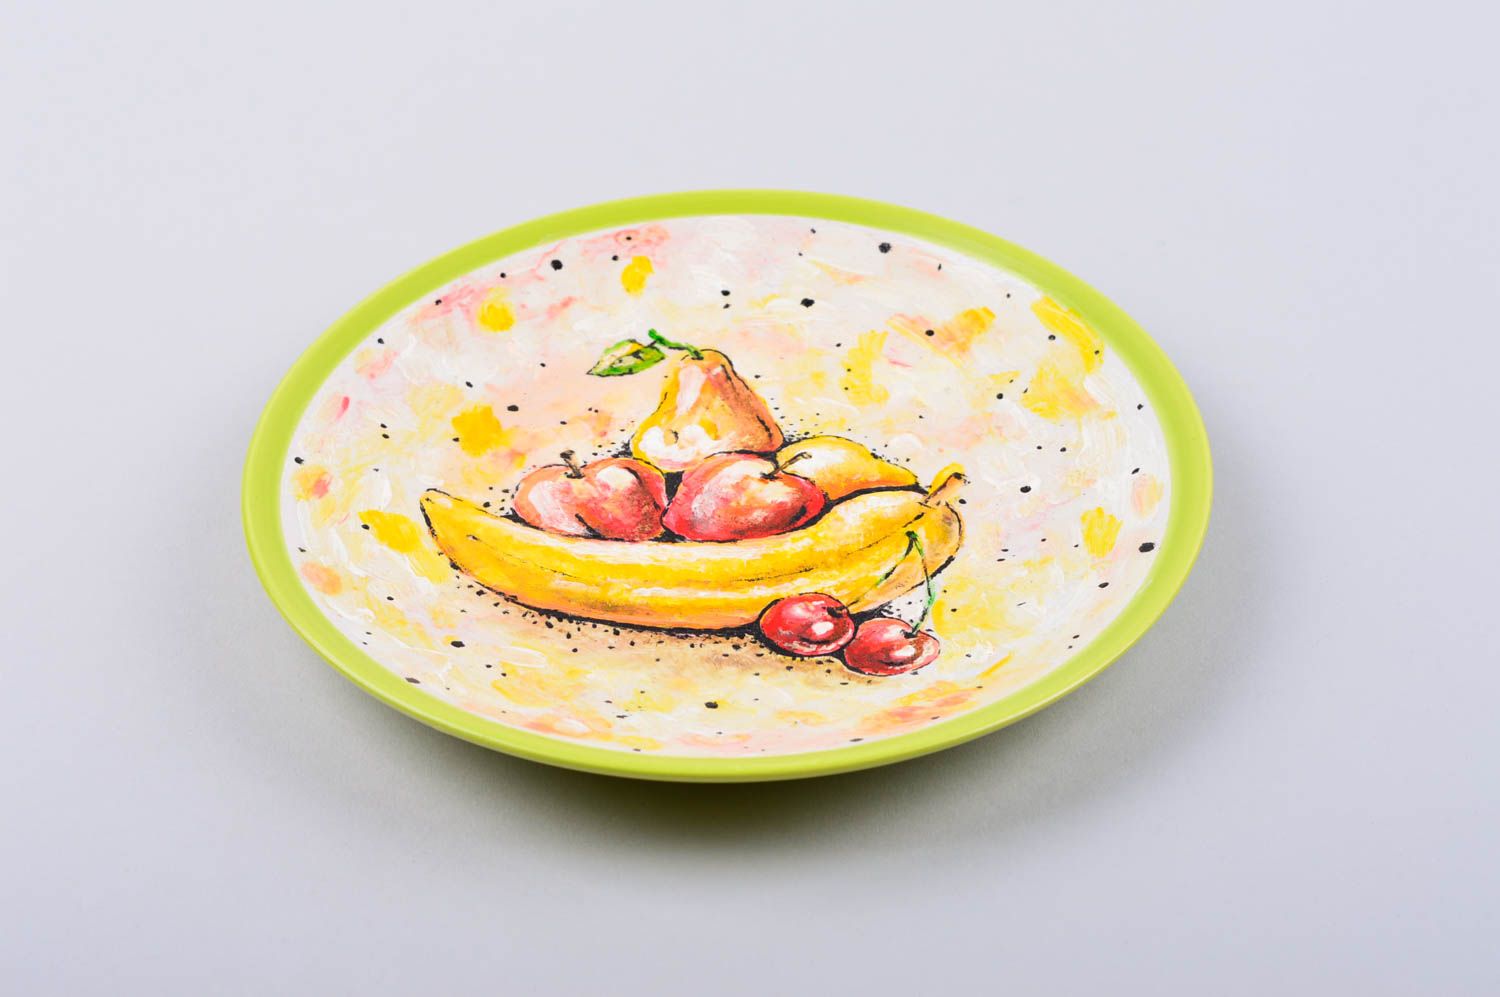 Handmade wall plate decorative ceramic plate gift ideas for decorative use only photo 3